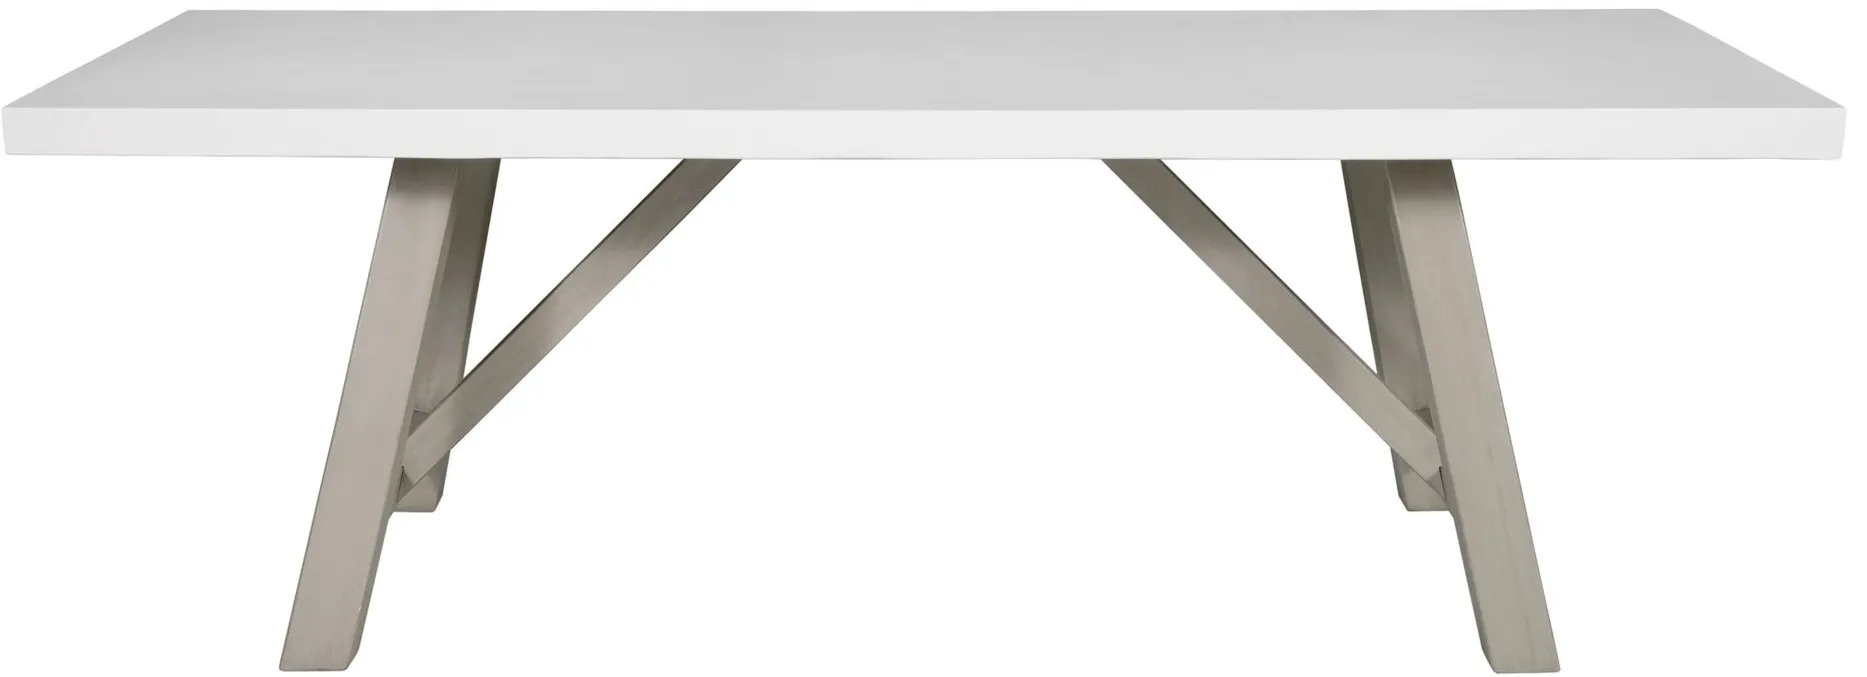 Mills Dining Table in Gray by Unique Furniture